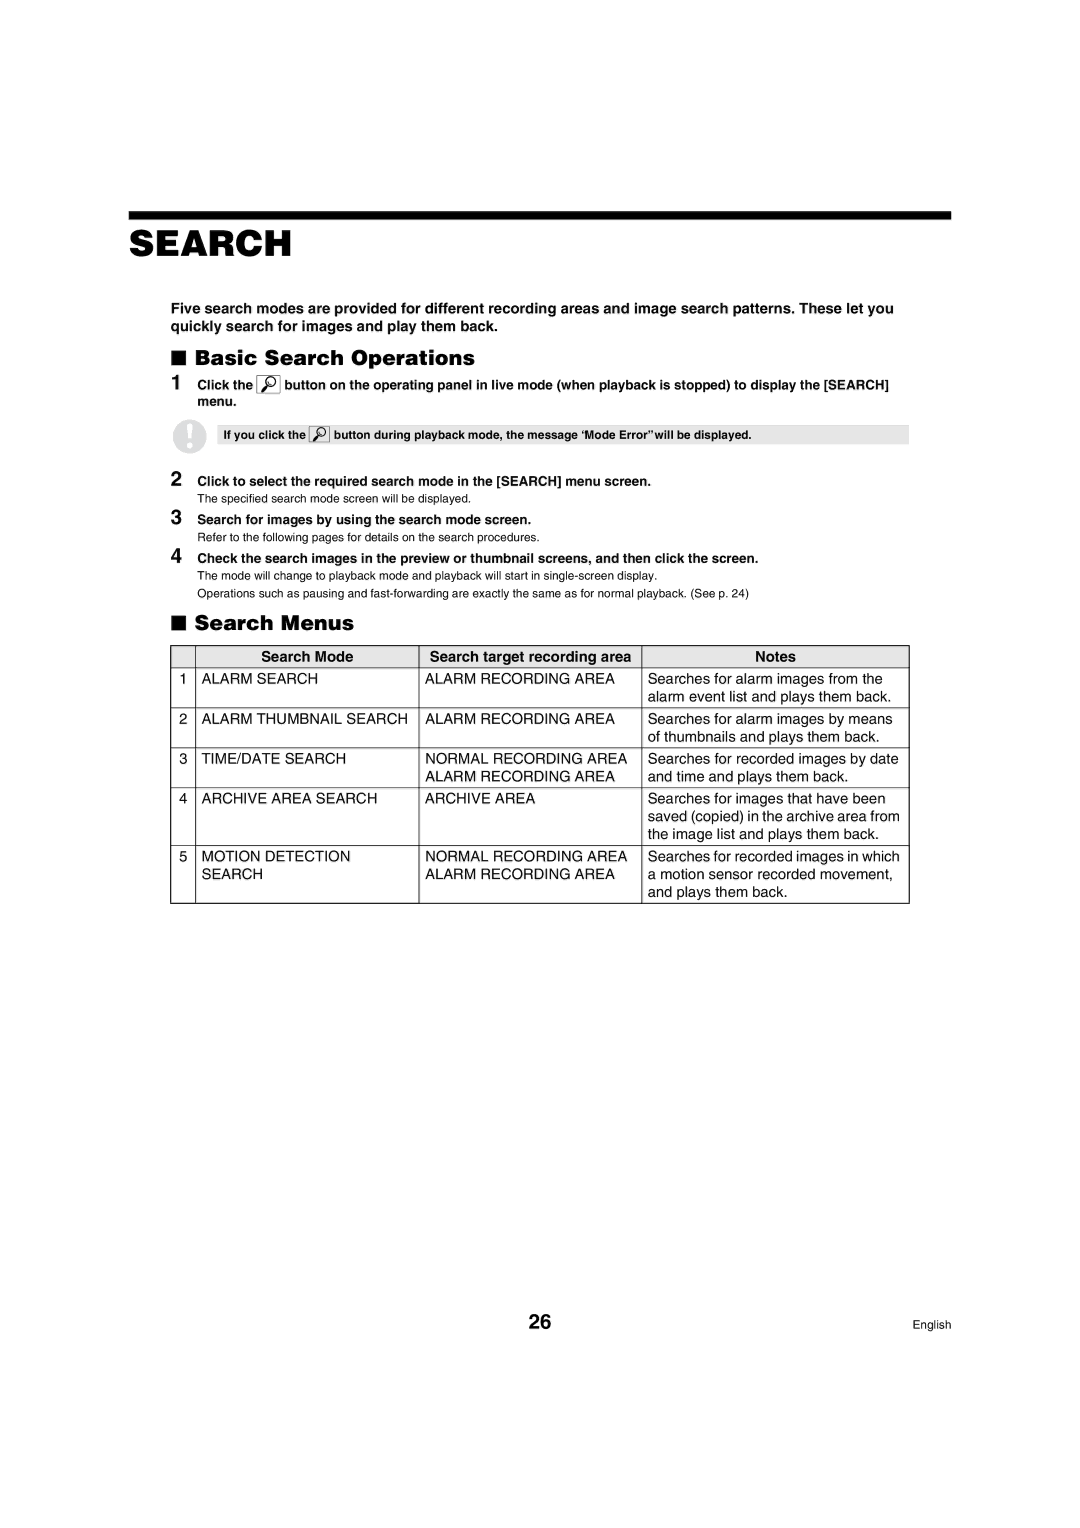 Sanyo DSR-3009 manual Basic Search Operations, Search Menus, Search for images by using the search mode screen 